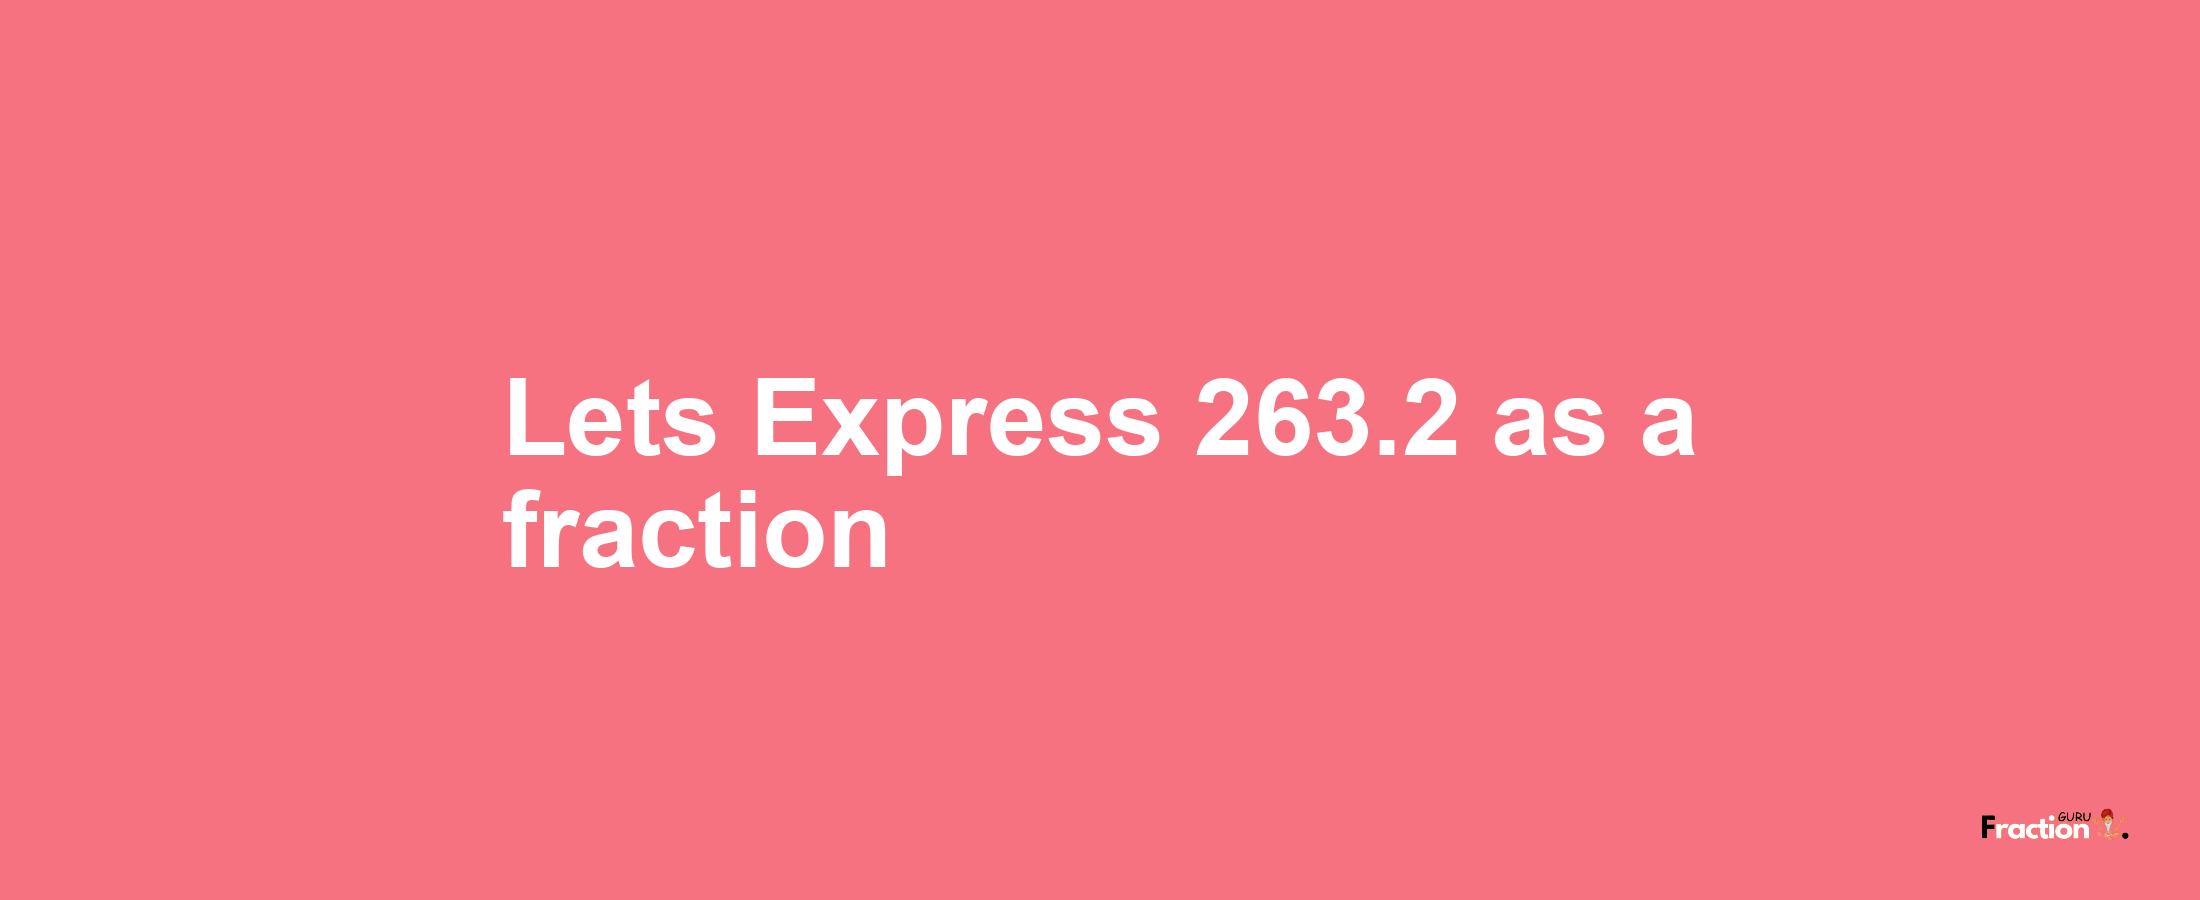 Lets Express 263.2 as afraction